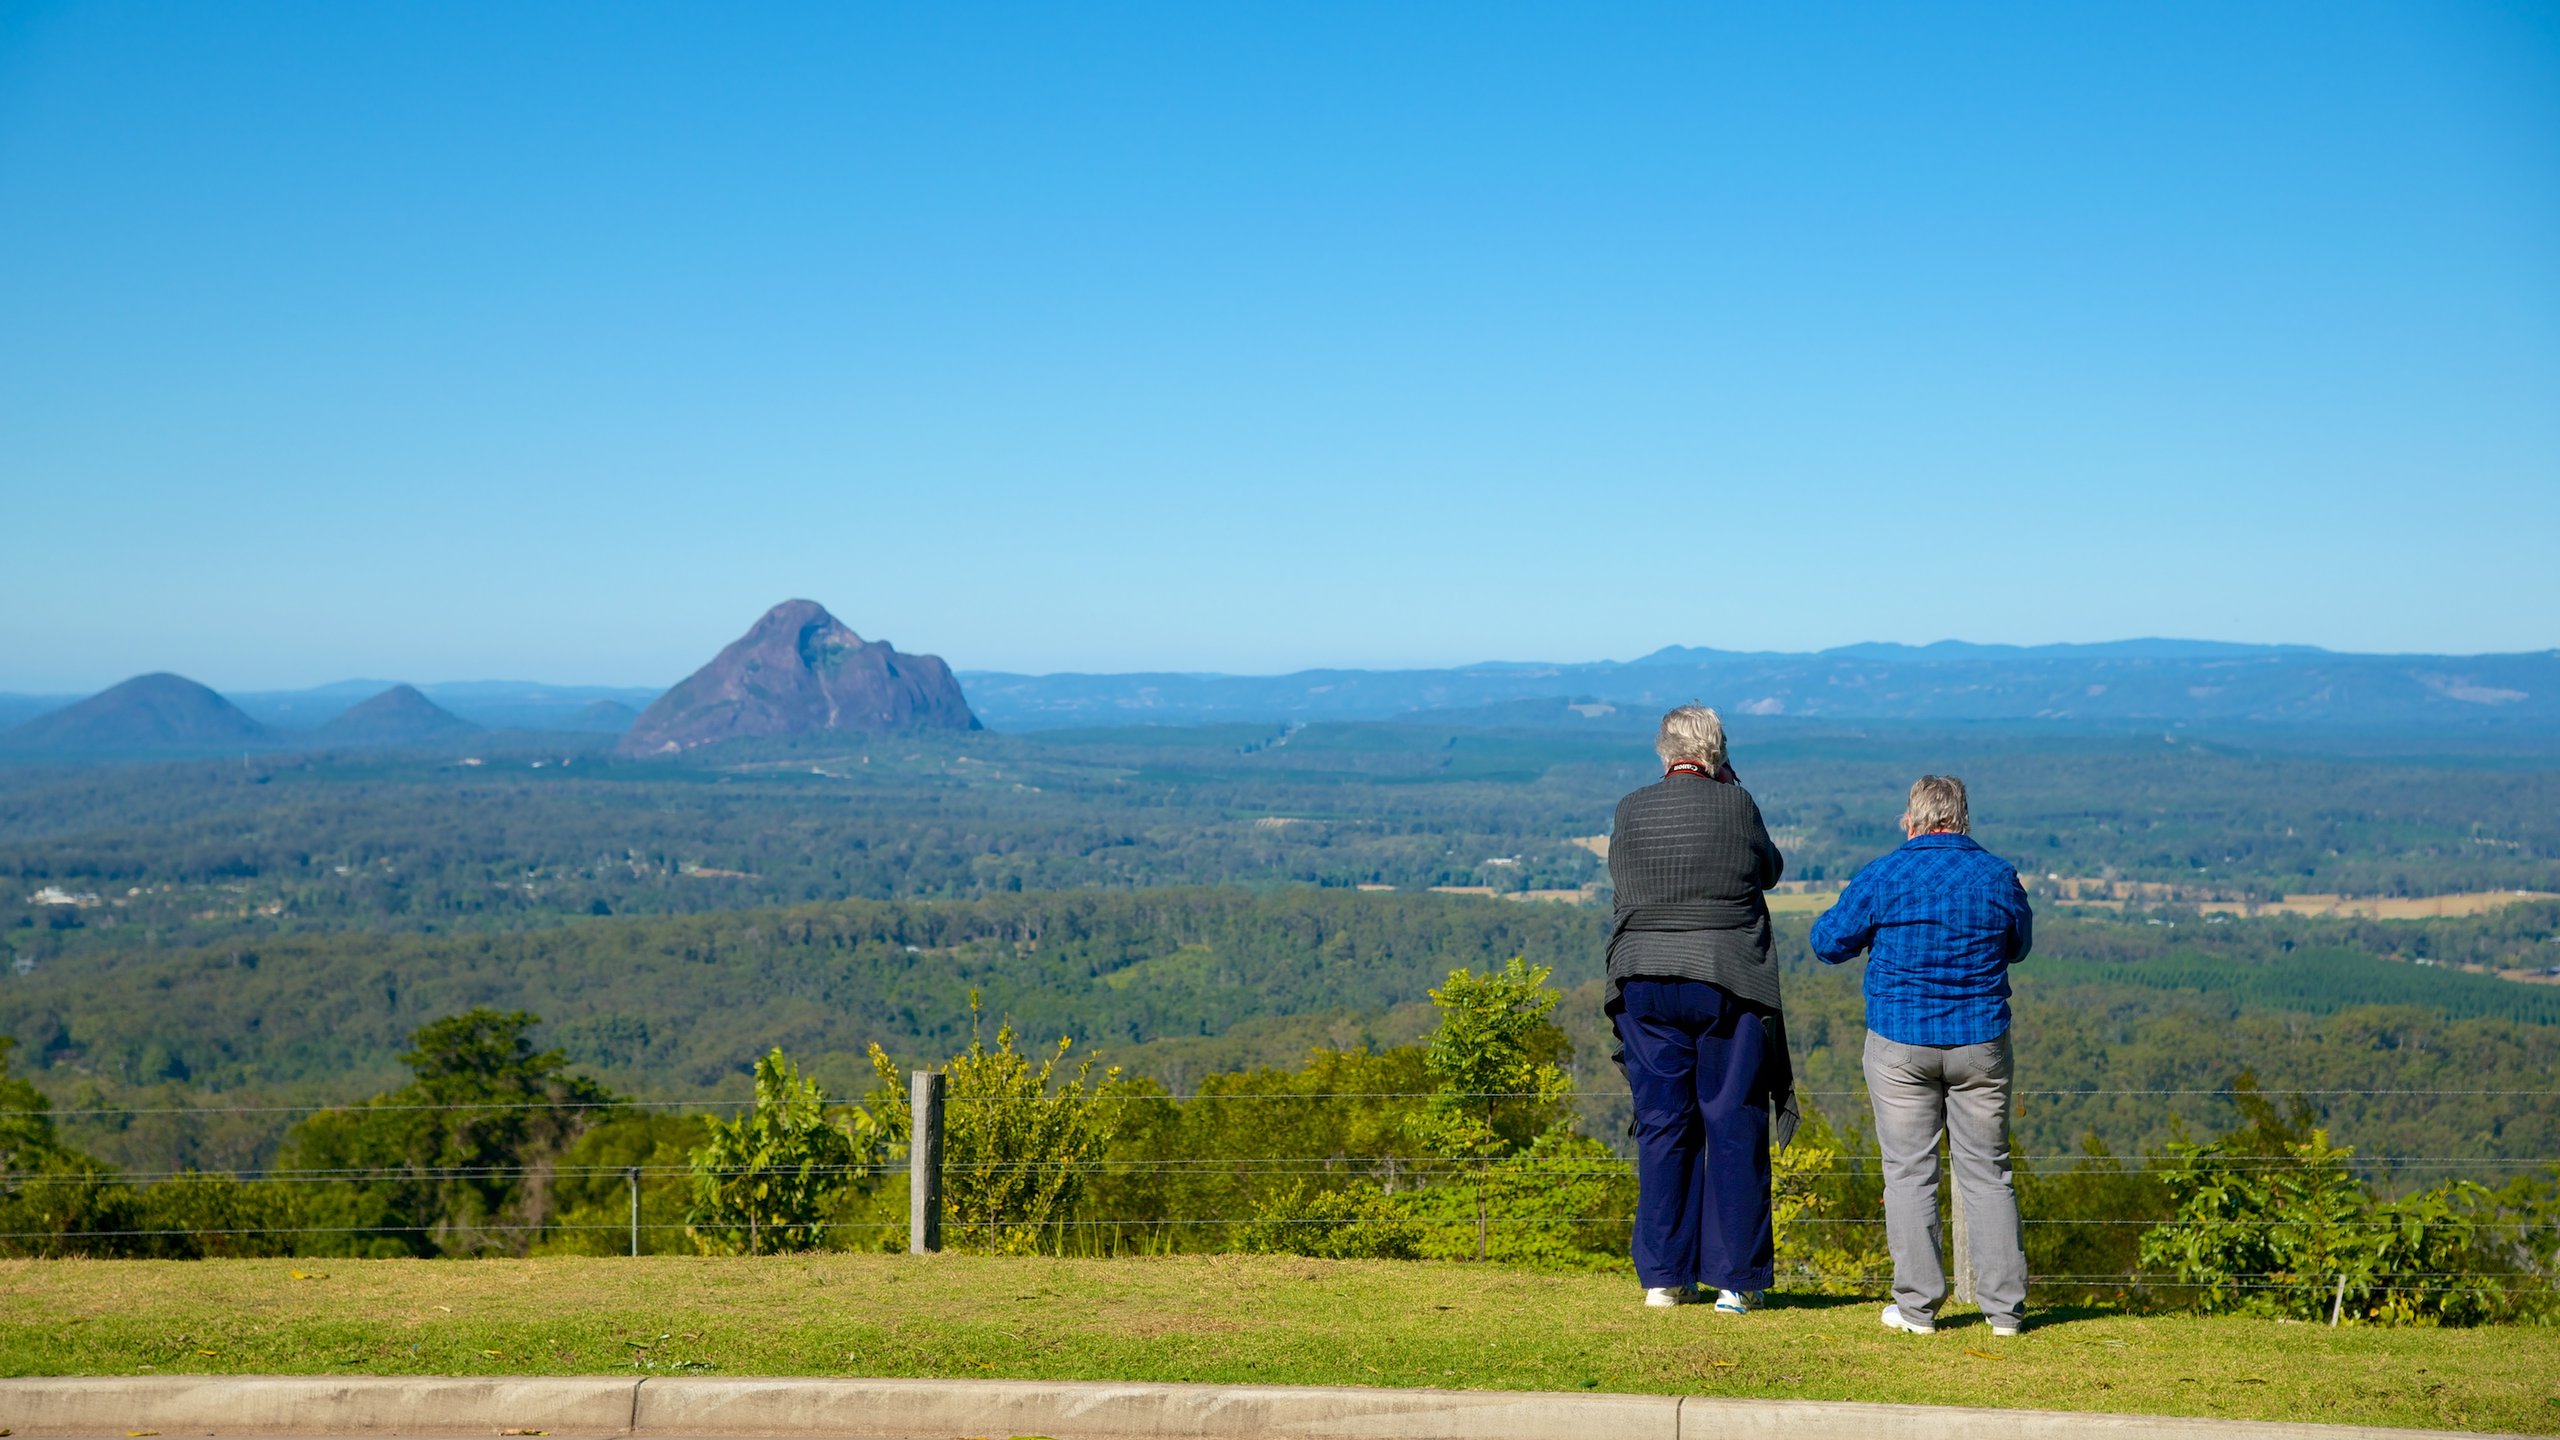 Glasshouse Mountains Wallpapers